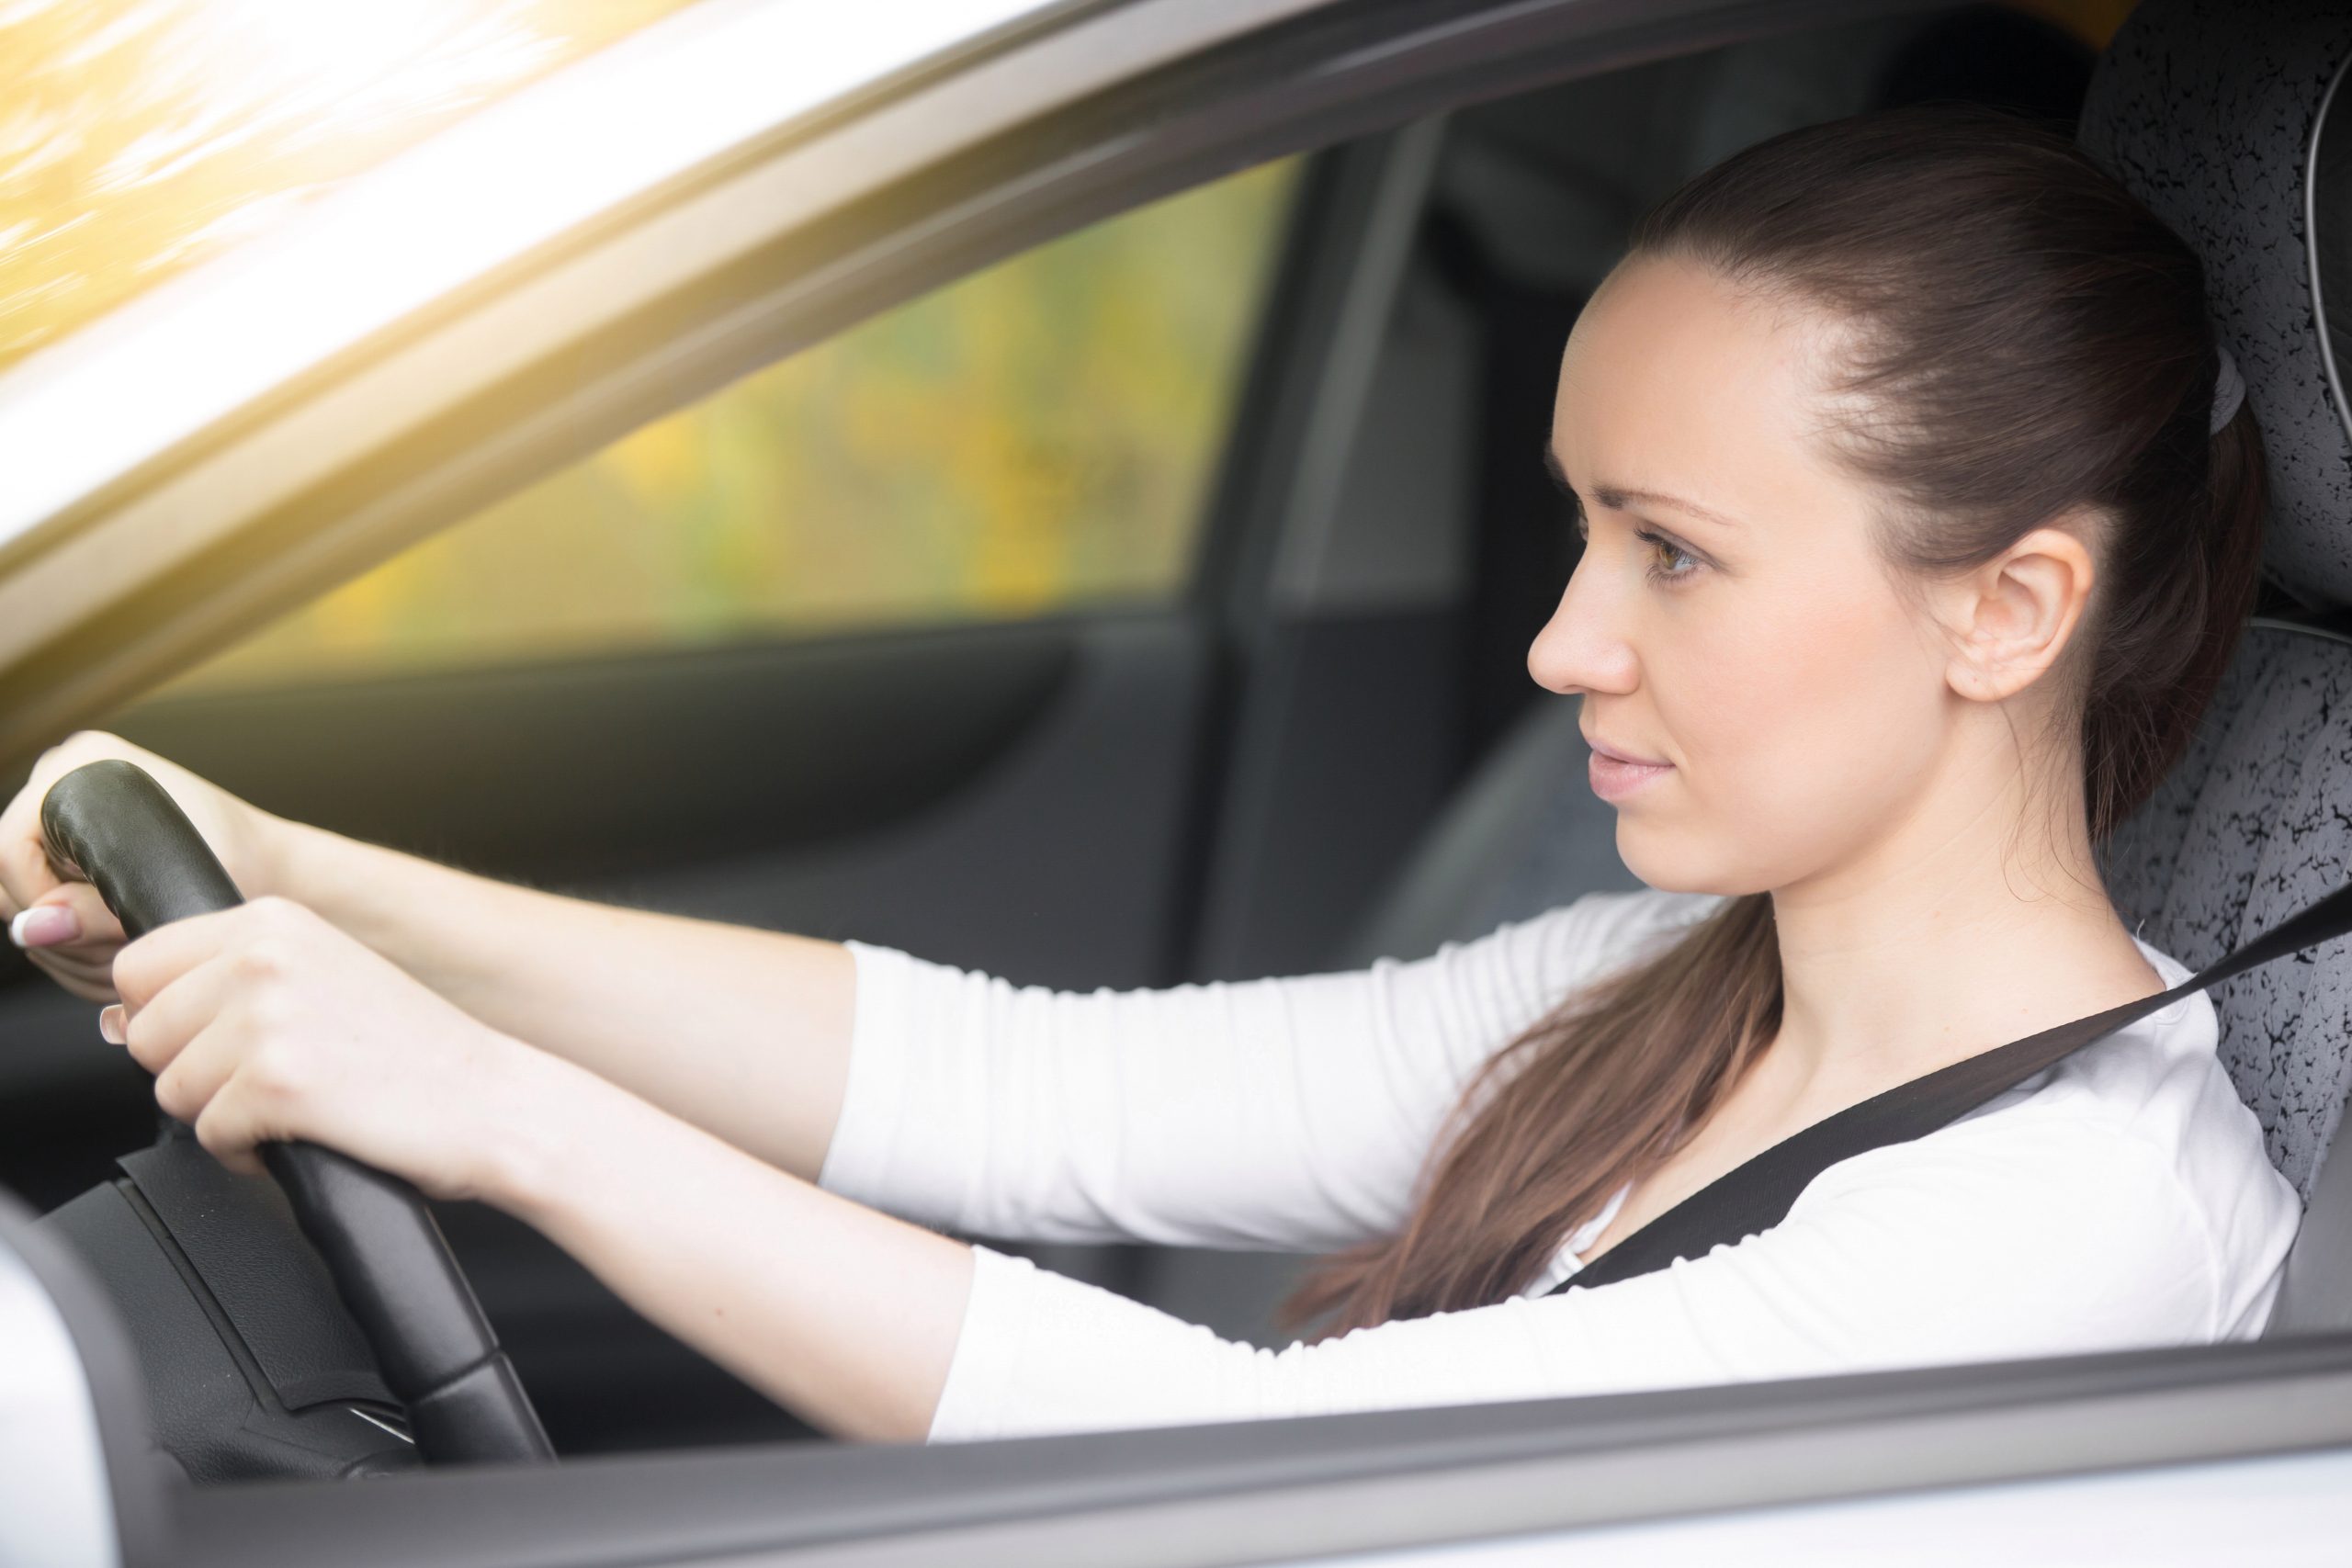 Younger Drivers See Car Insurance Prices Fall And Older in dimensions 5472 X 3648